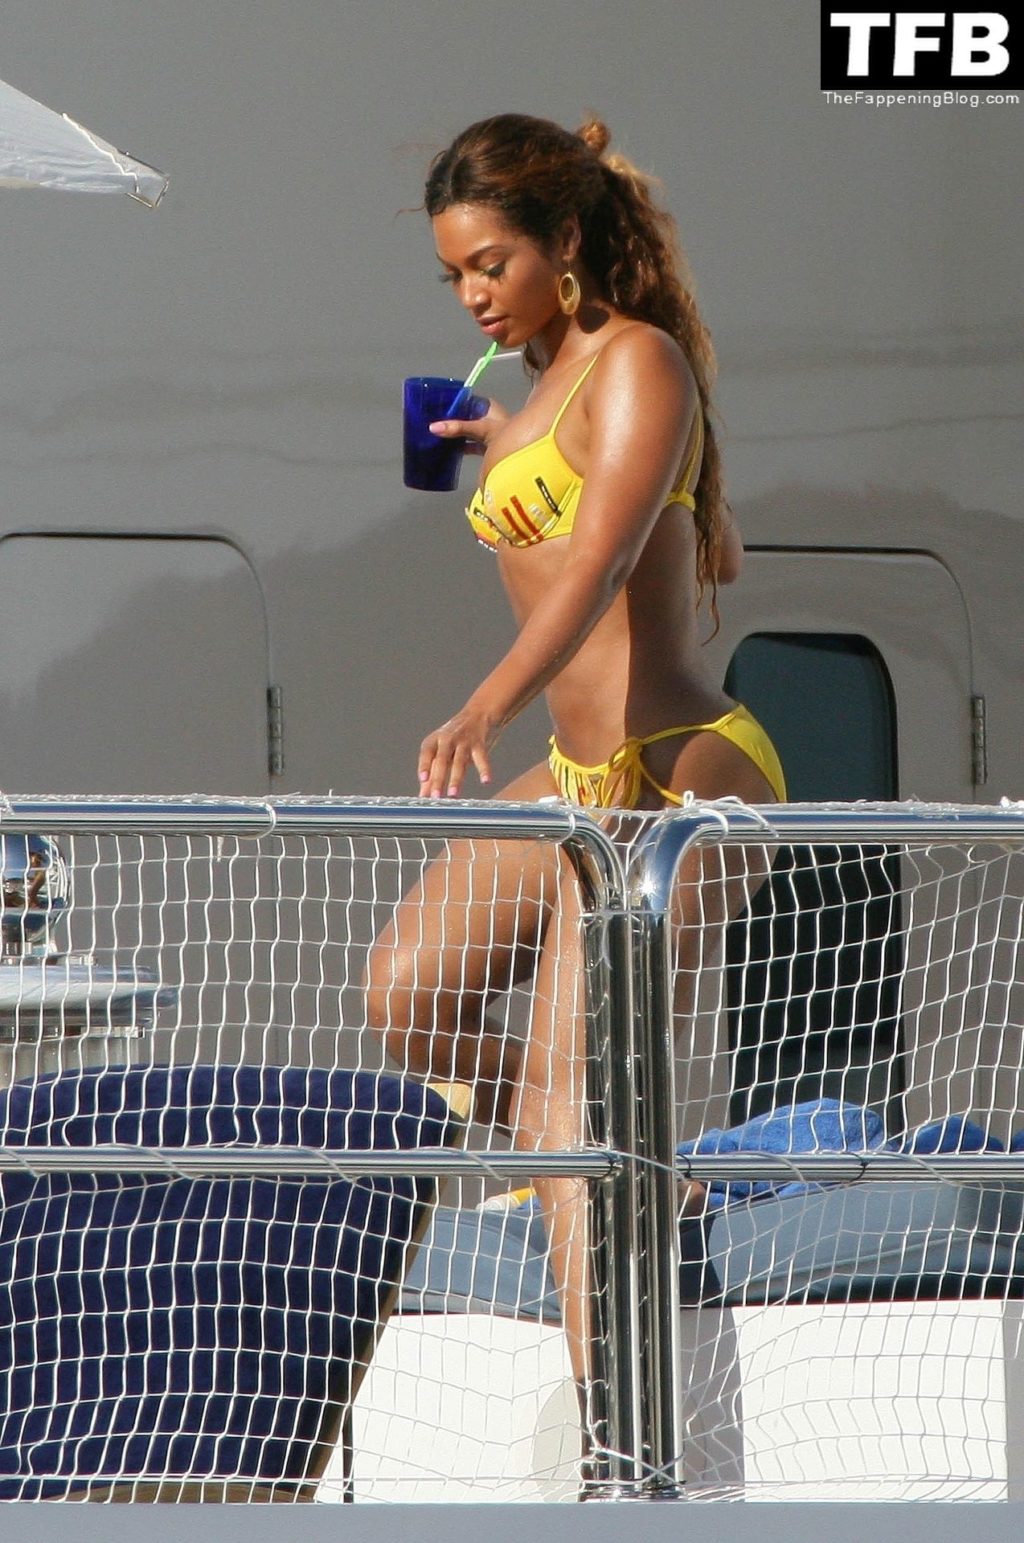 Beyonce Sexy 3 thefappeningblog.com  1024x1543 - Beyonce Flaunts Her Sexy Curves in a Bikini While Sunbathing on Her Yacht in Monaco (13 Photos)